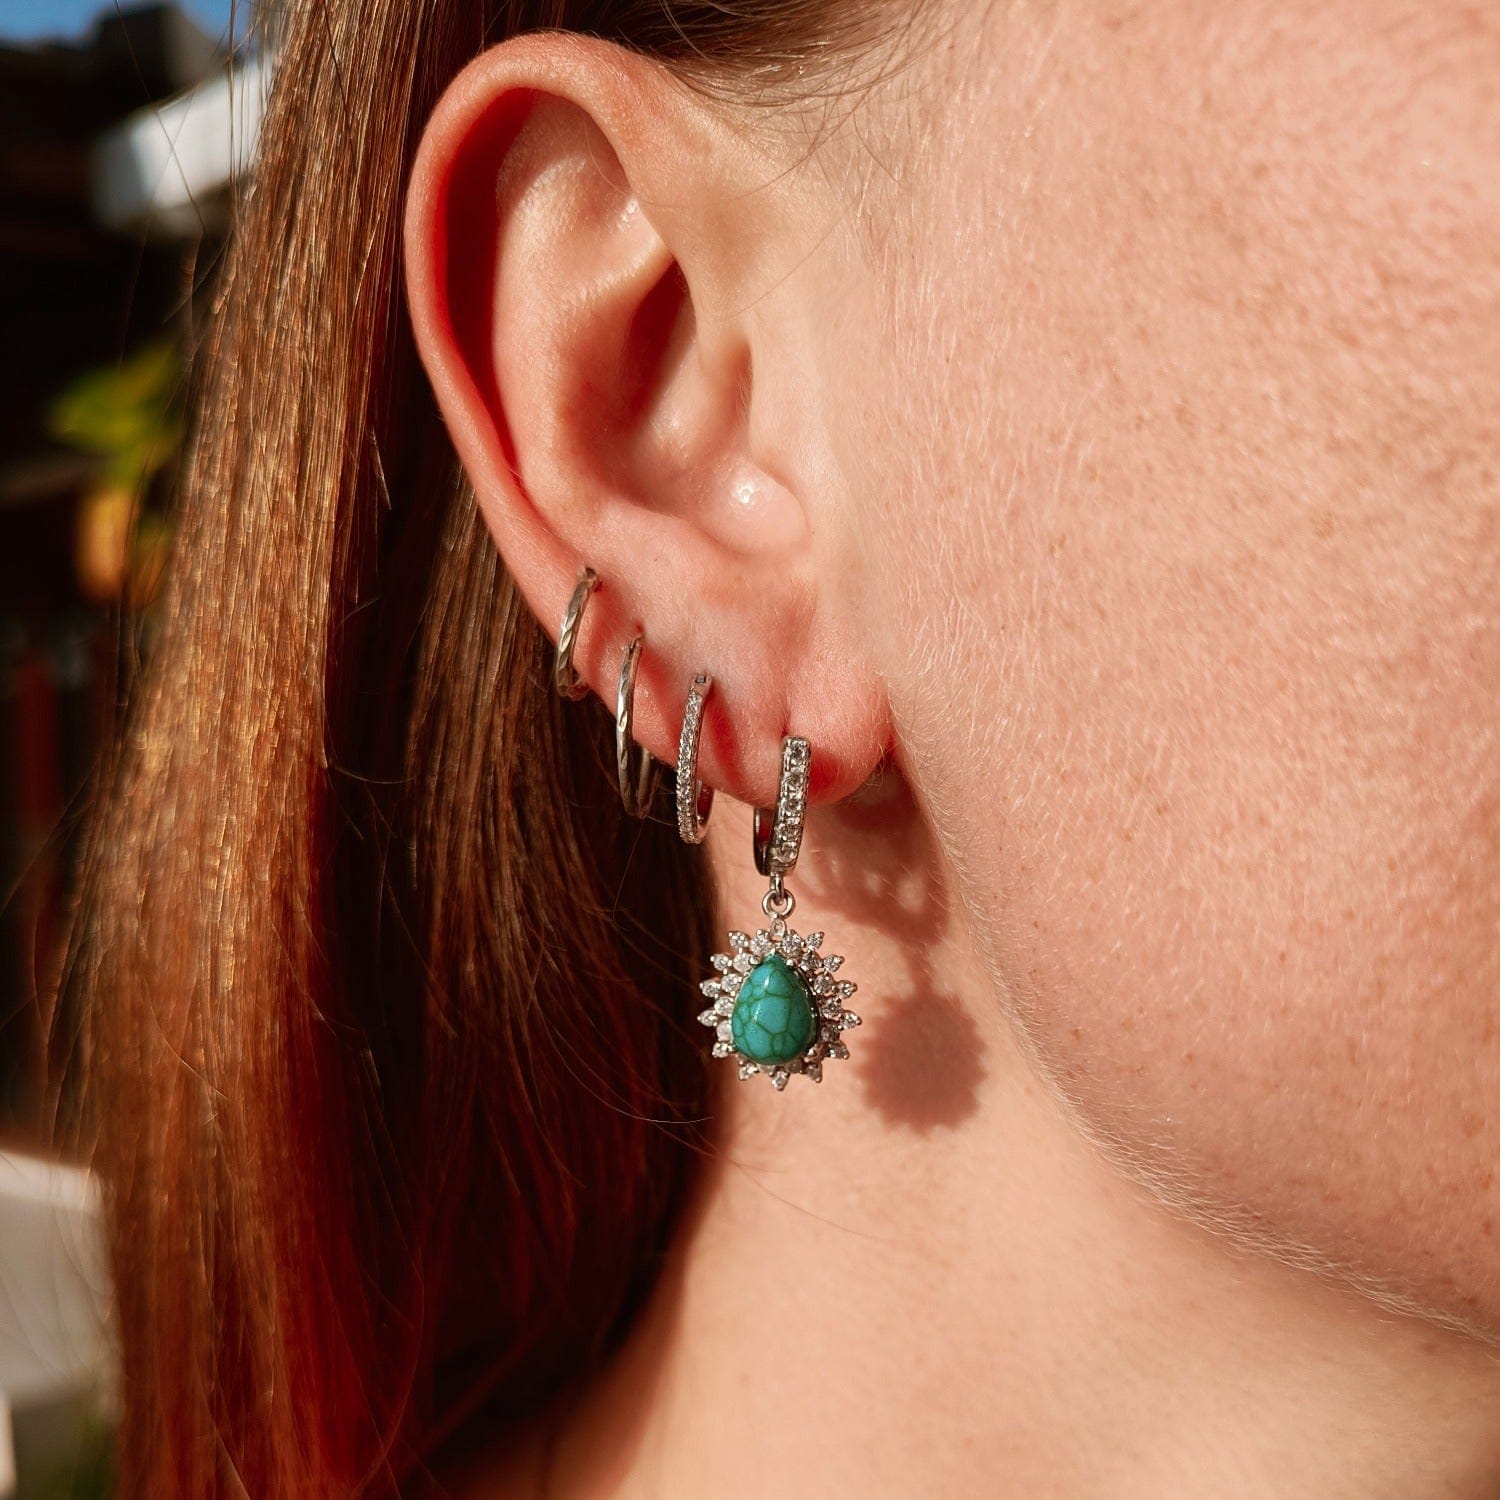 Blue Lagoon Turquoise Earrings featuring turquoise stones set in S925 sterling silver on a model in natural shaded lighting